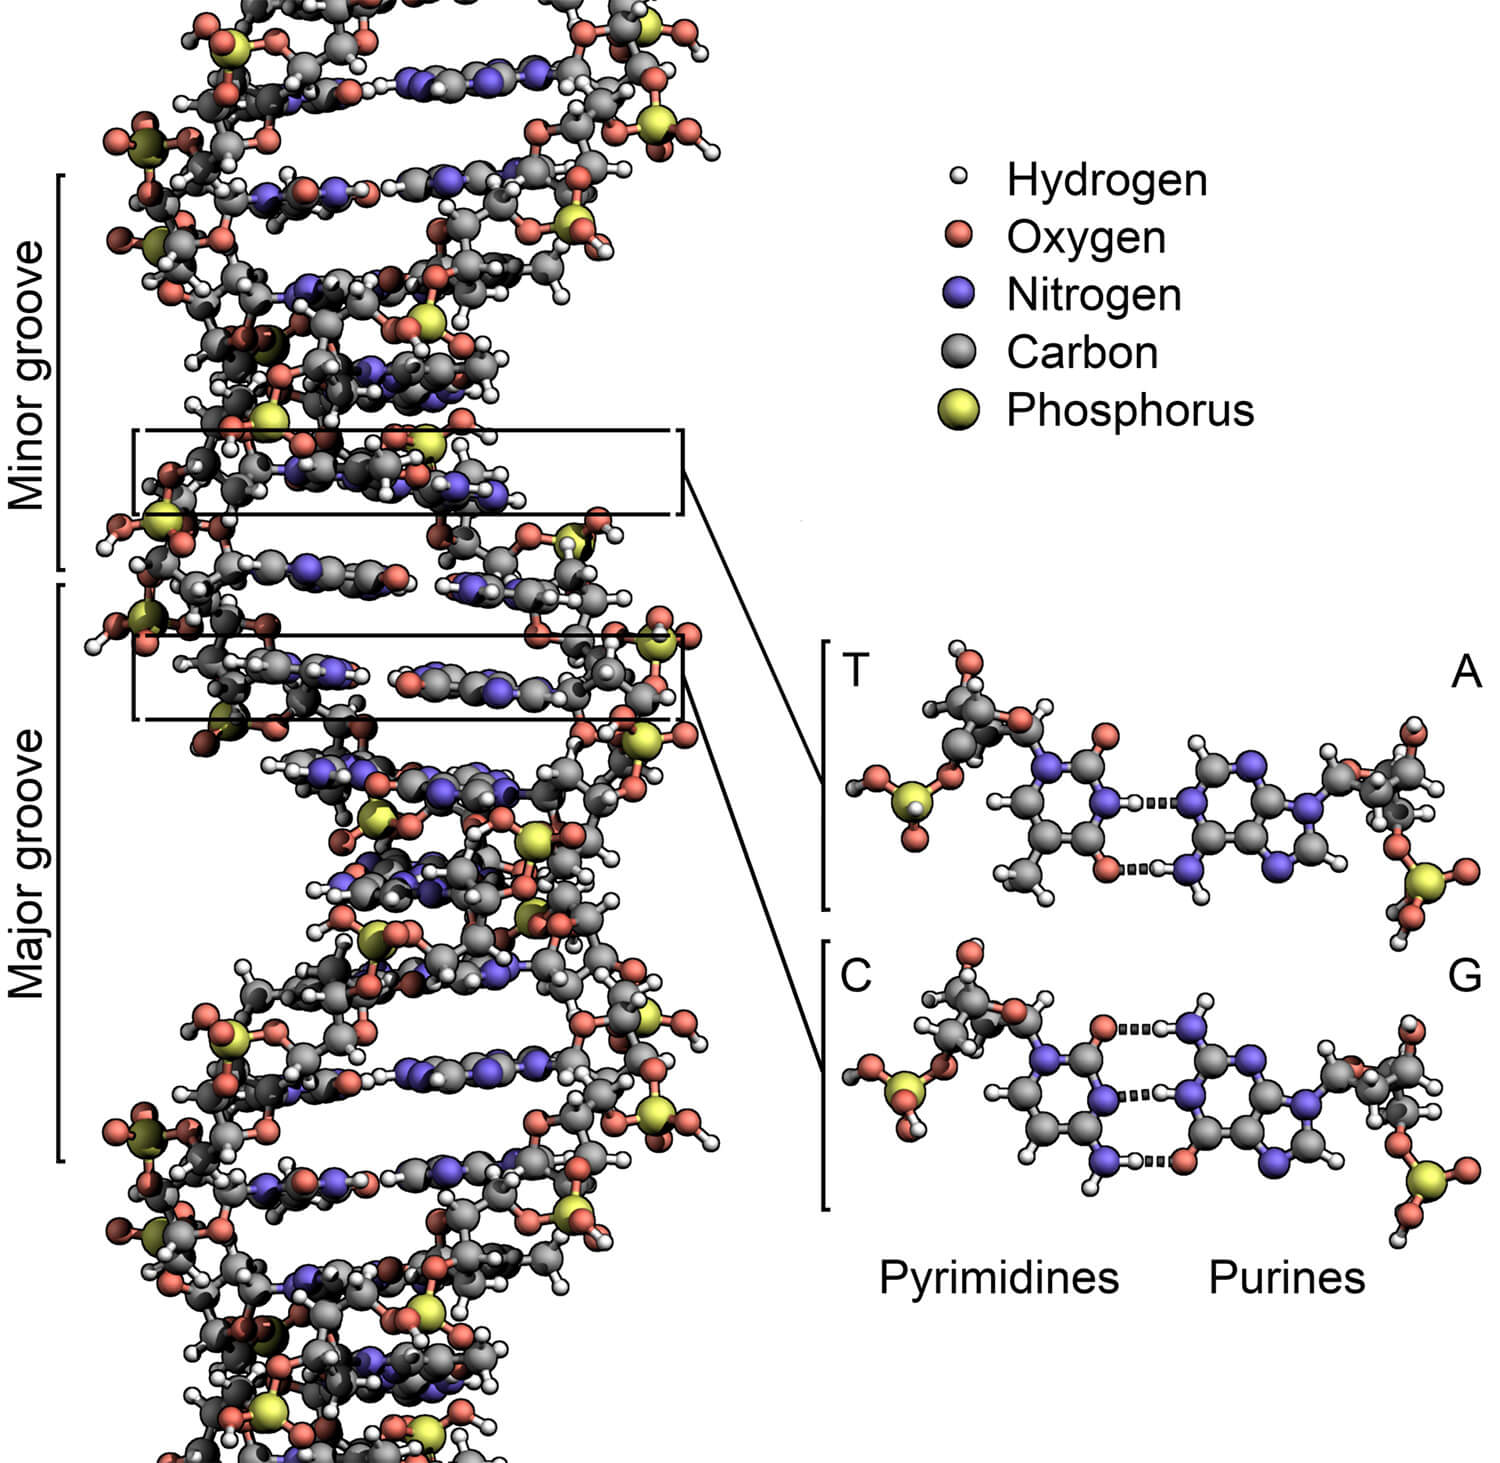 The atomic structure of DNA